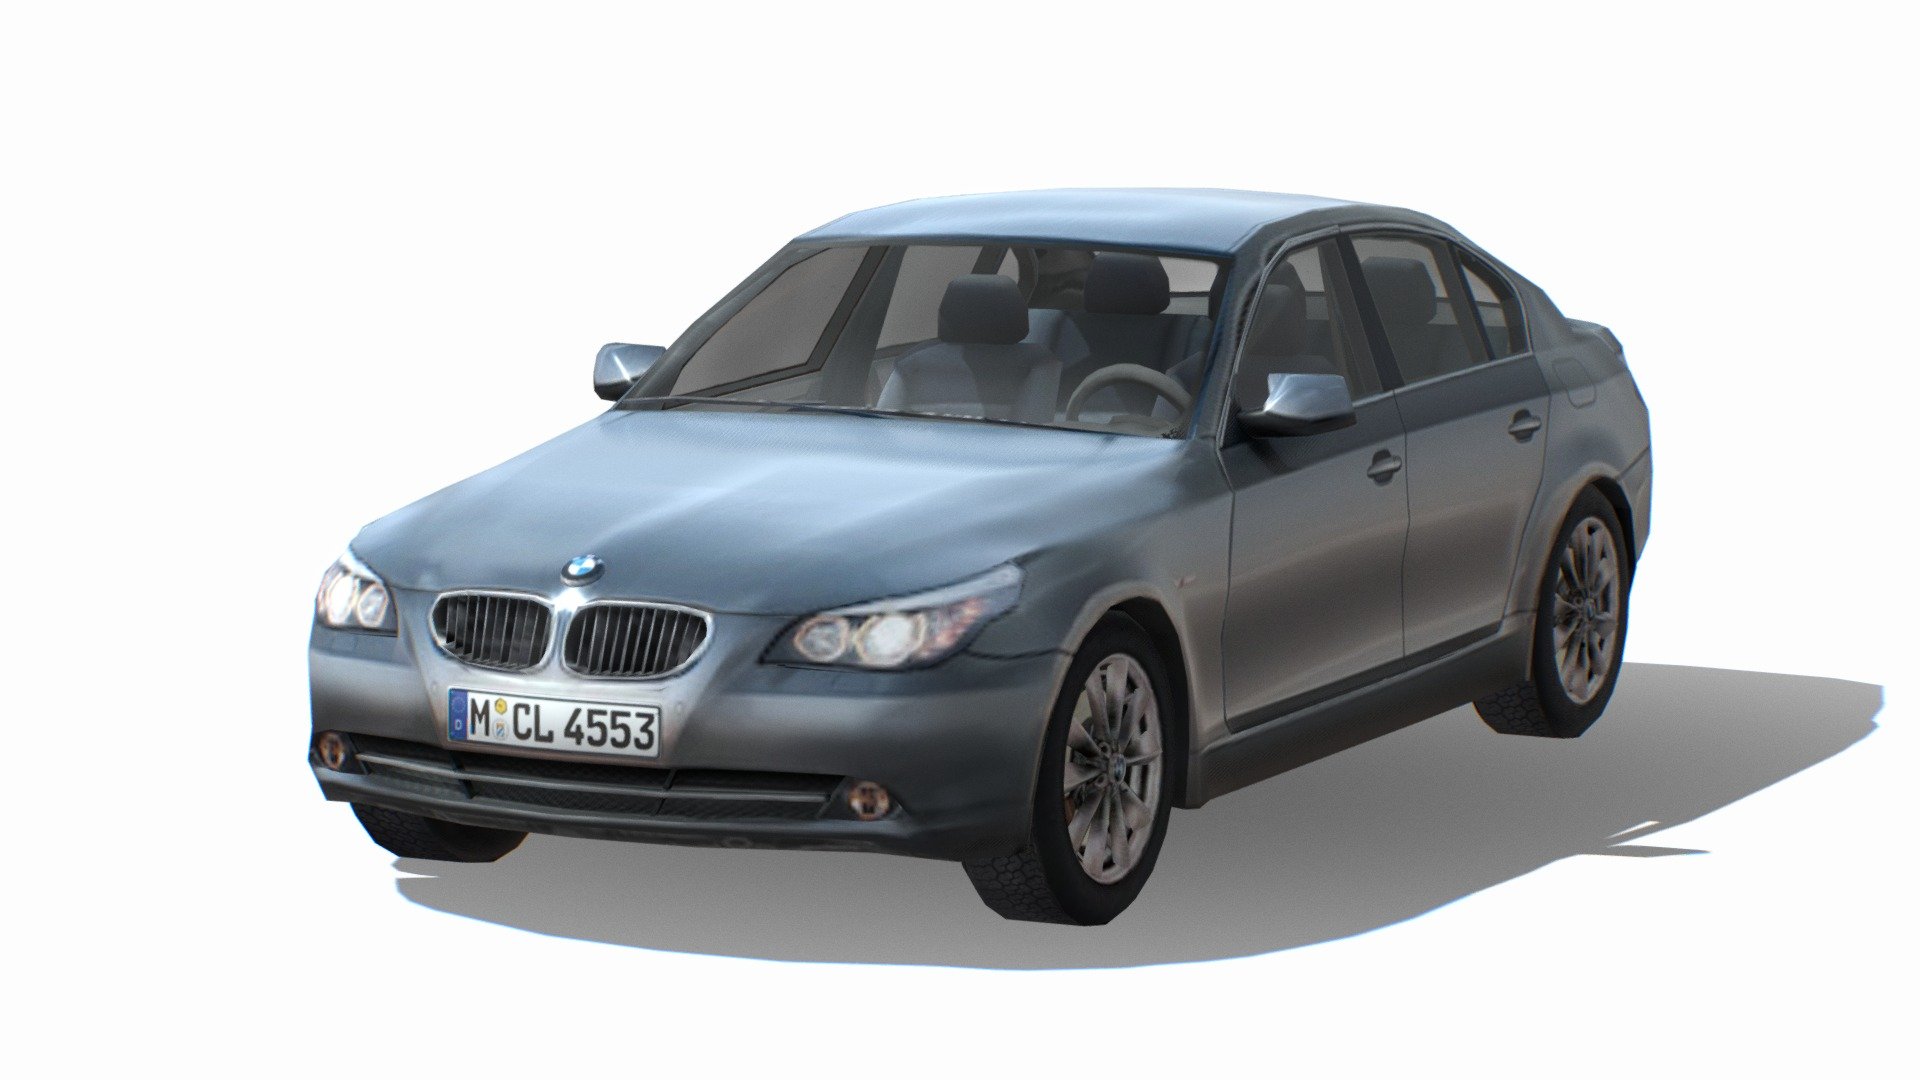 2006 BMW 5- Series E60 545i1 lowpoly car model

Statistics:

Vertices: 5,620

Edges: 10,432

Faces: 4,970

Triangles: 10,145

&#9745; UV maps

&#9745; Clean topology

&#9745; 
&#9745; Ready for animation rig, wheels turnning connected to handle wheel, all doors are rigged.
 - lowpoly car BMW 5- Series E60 2006 - Buy Royalty Free 3D model by SalHirut 3d model